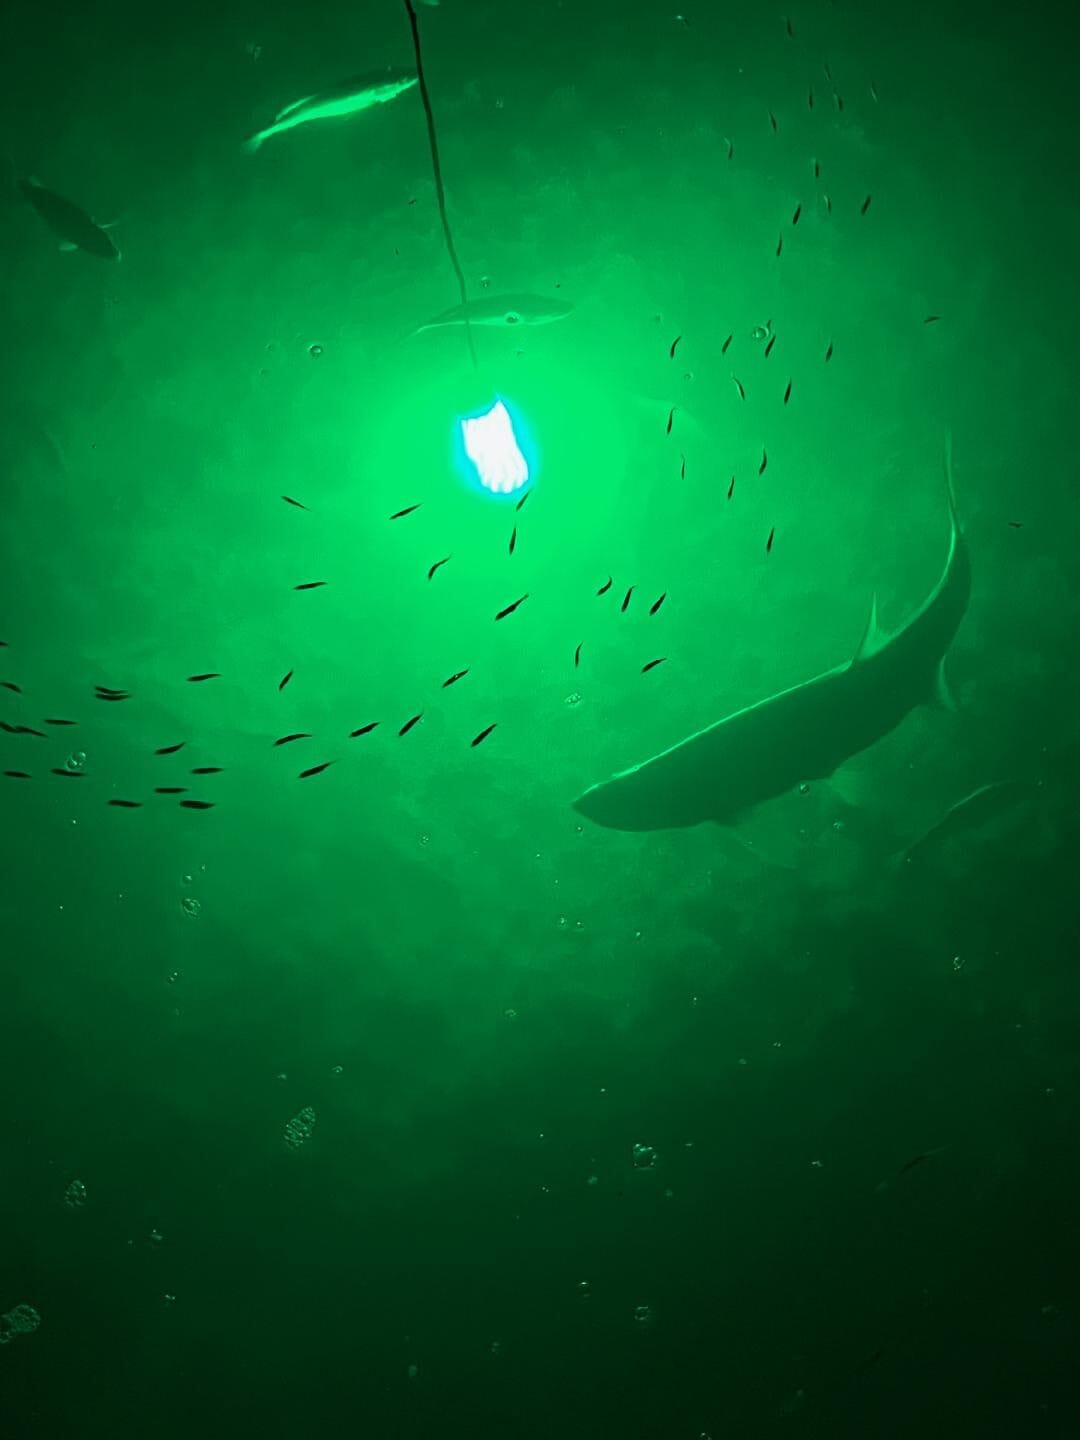 Green light can attract the fishes without lures